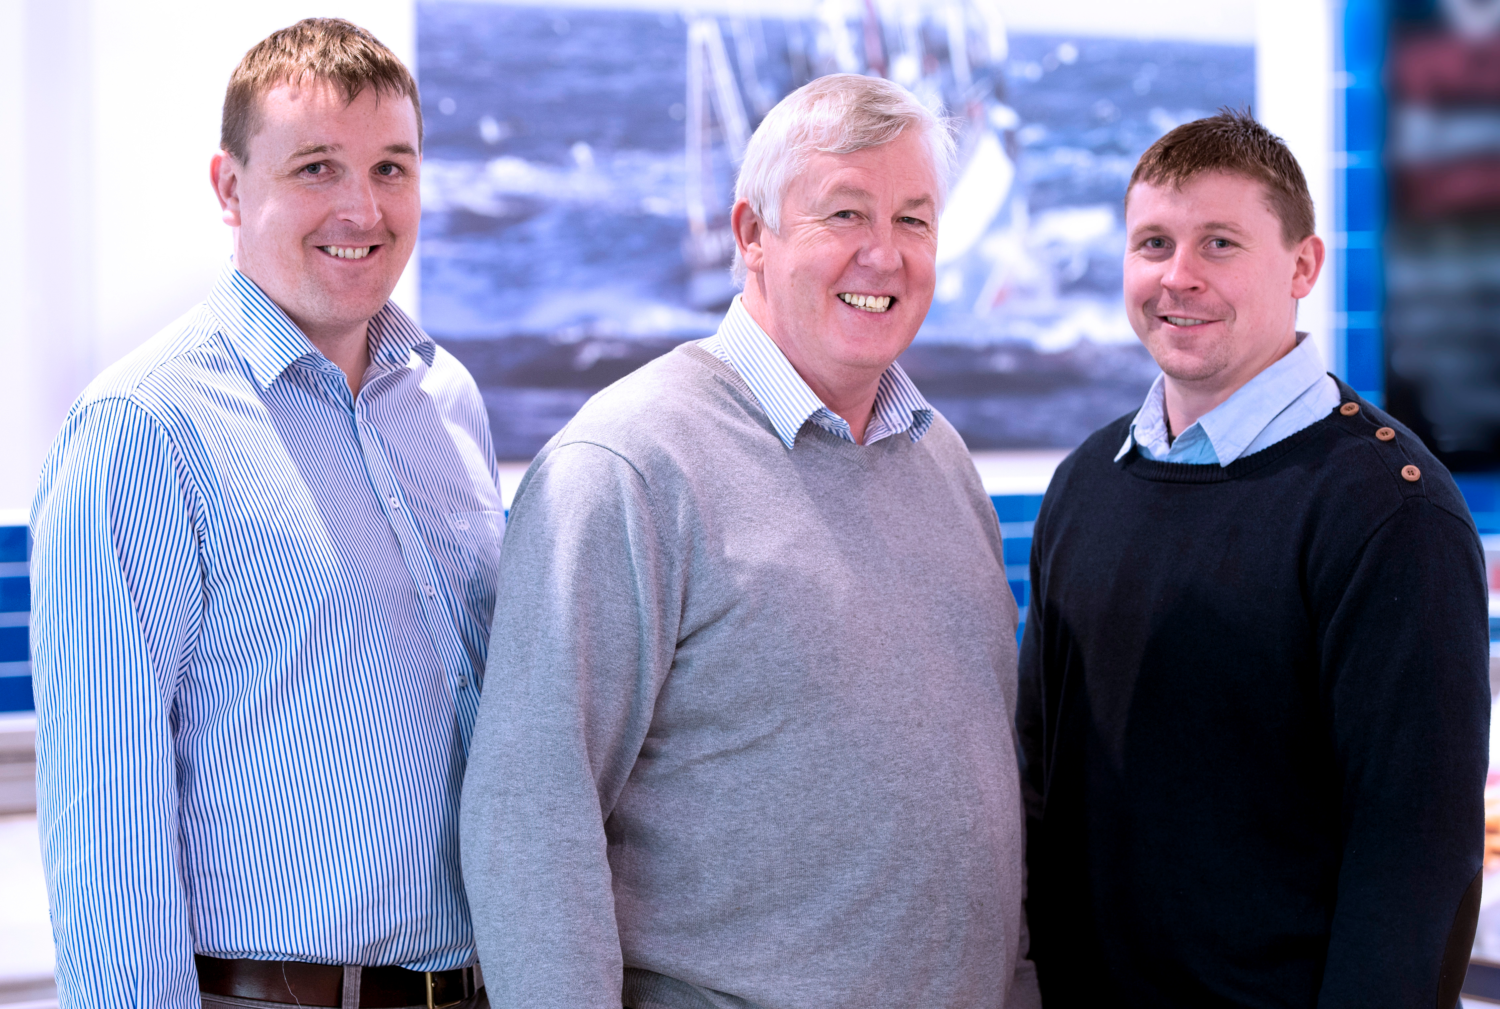 Managing Directors of Keohane Seafoods from left to right Colman Keohane Mike Keohane Brian Keohane